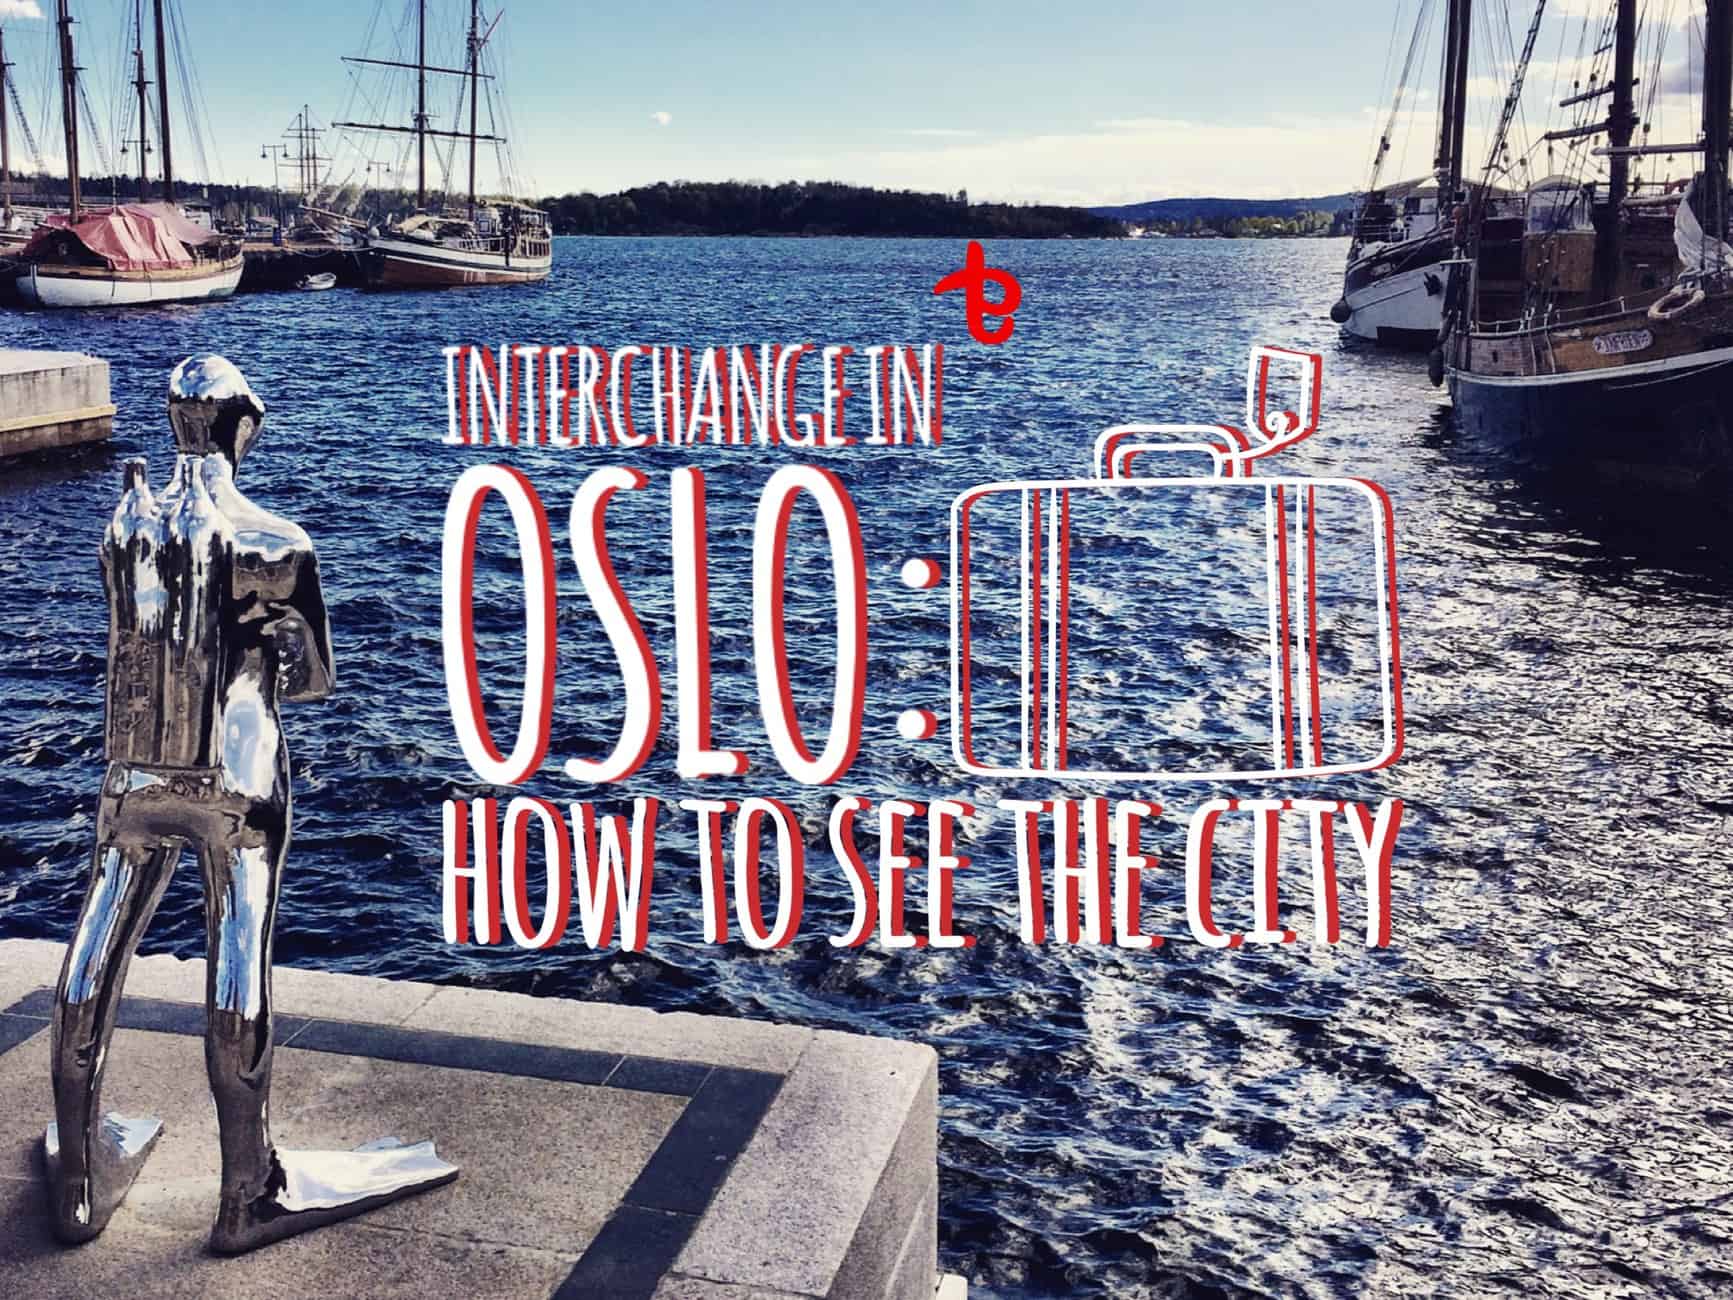 Stopover in Oslo: how to see Oslo in just a few hours 